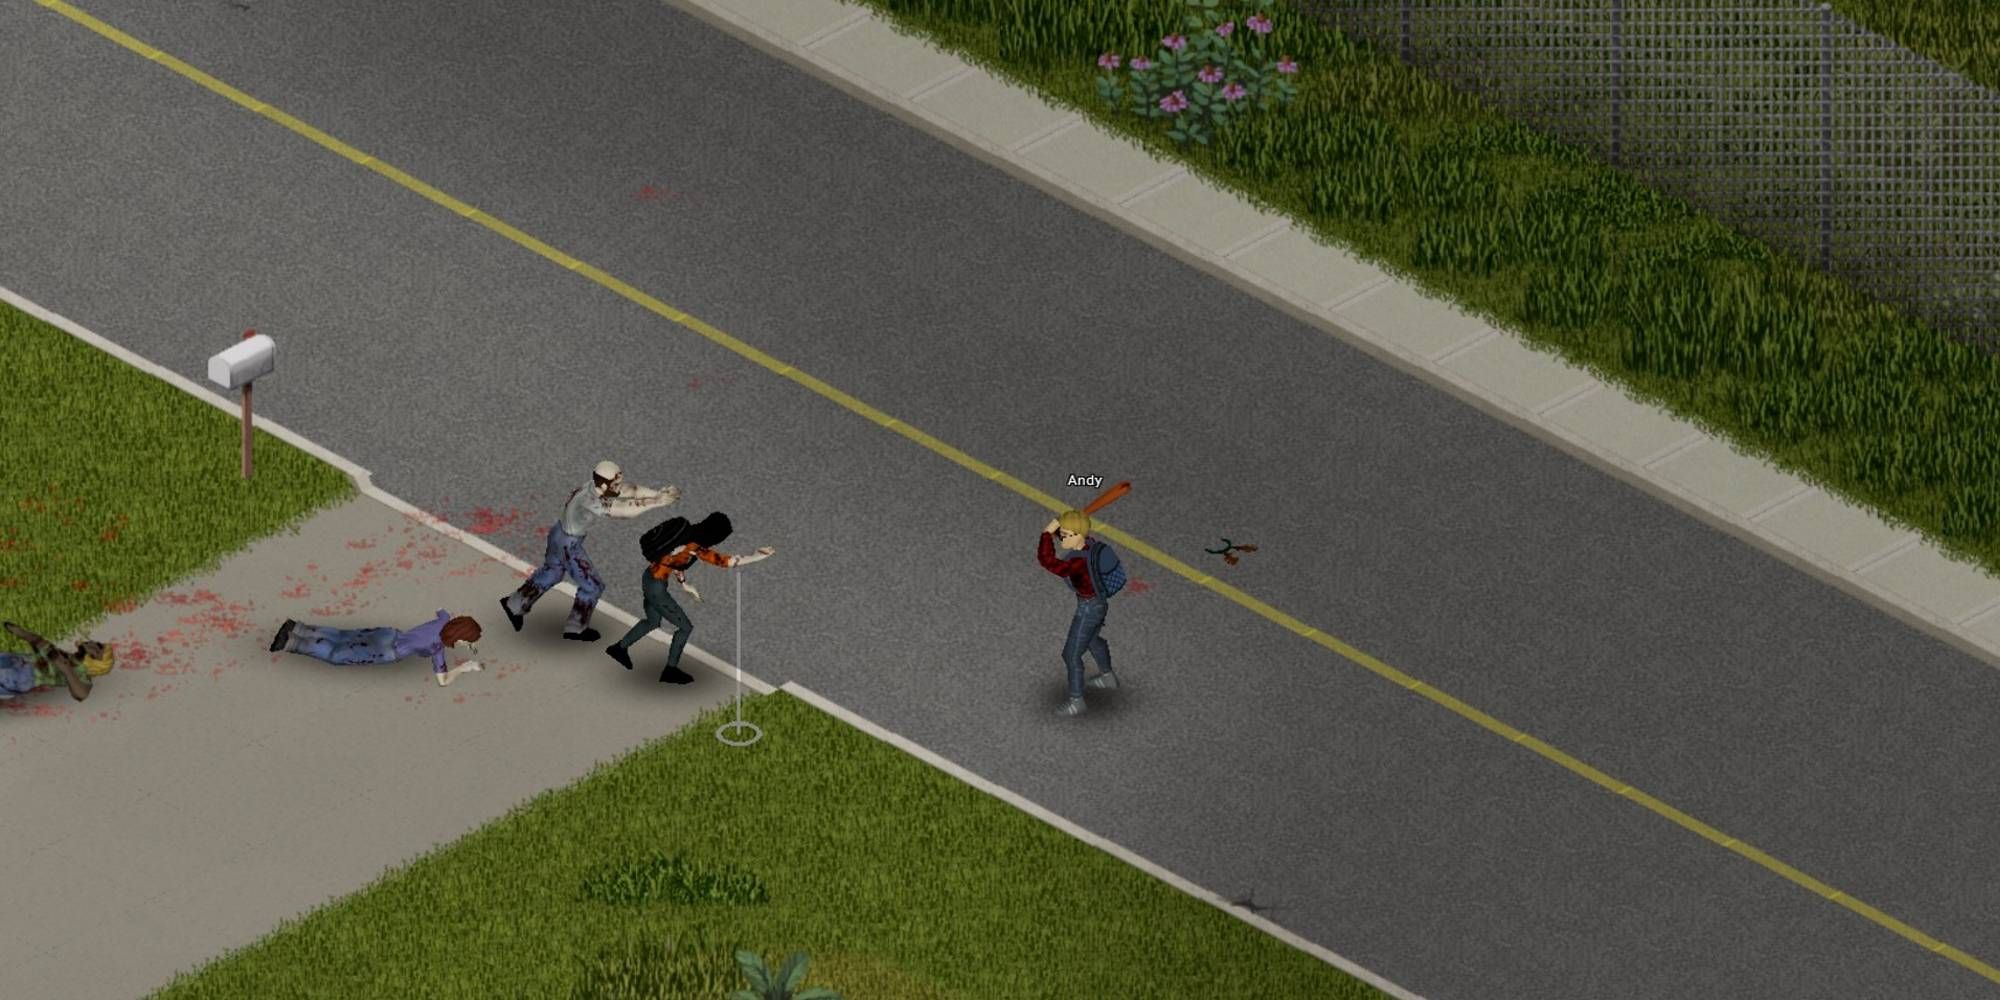 A man wielding a spiked baseball bat and fighting zombies